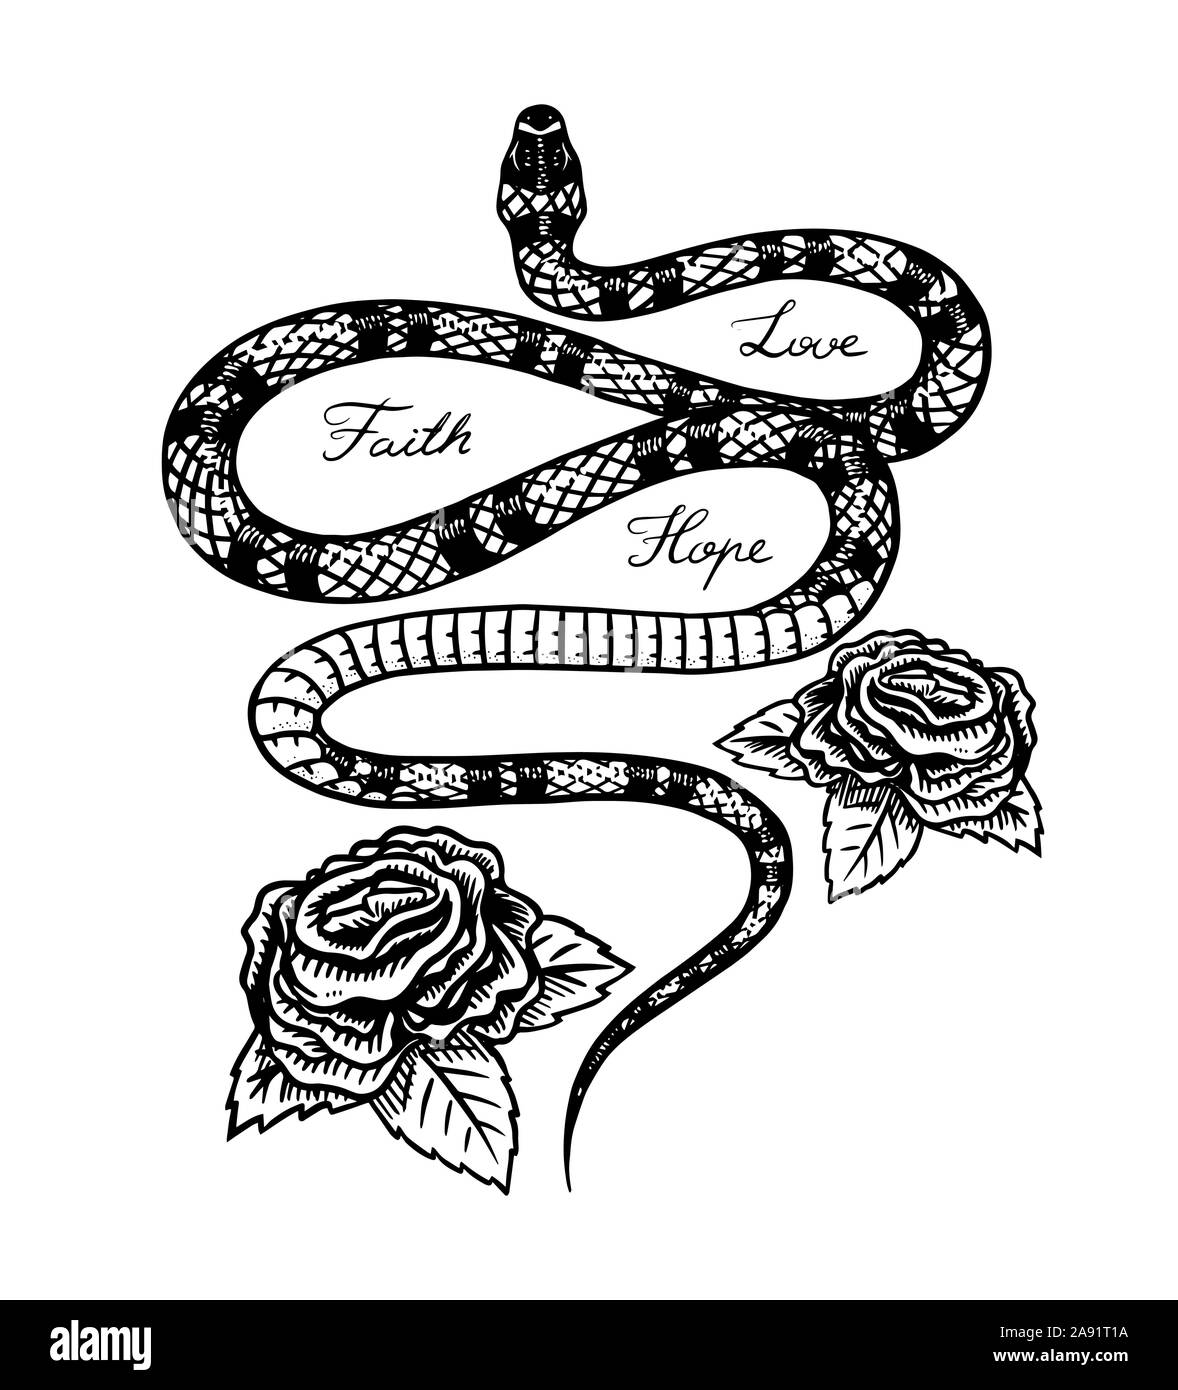 Snakes Flowers Tattoo Design Hand Drawn Stock Vector Royalty Free  711466438  Shutterstock